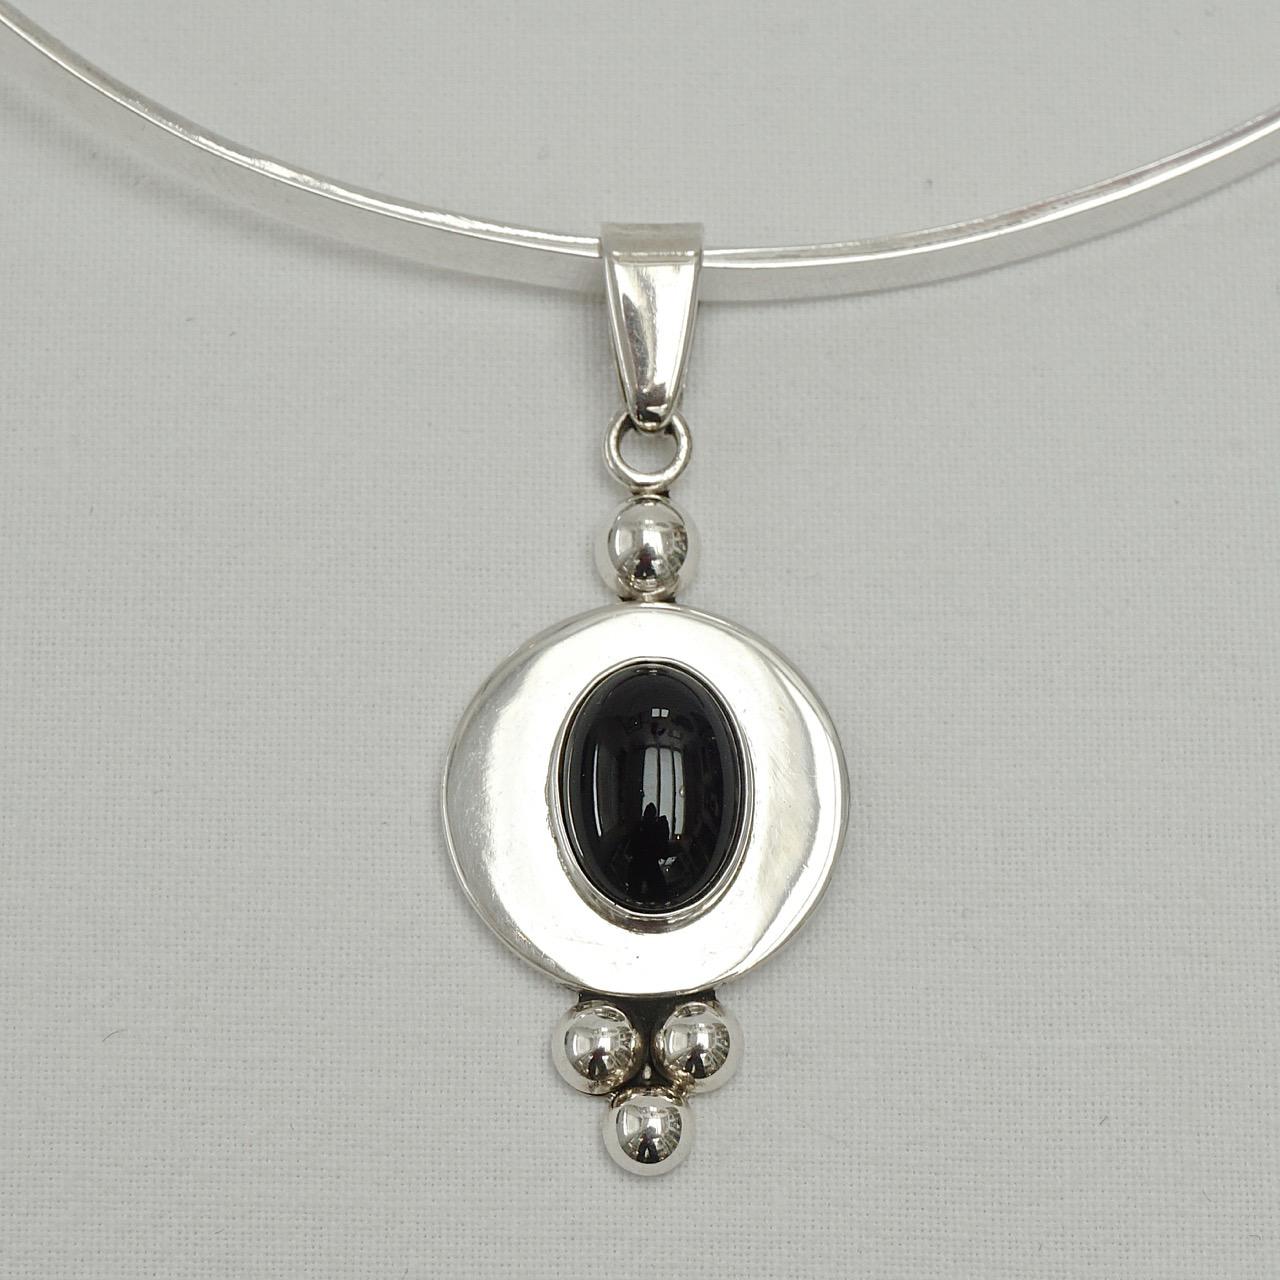 Mexico sterling silver torque collar necklace with a sterling silver and onyx pendant. Length approximately 34.5cm / 13.5 inches, and width 3.5mm / .14 inches. The pendant is length 5cm / 1.9inch by 2.1cm / .8 inch. The necklace is in very good